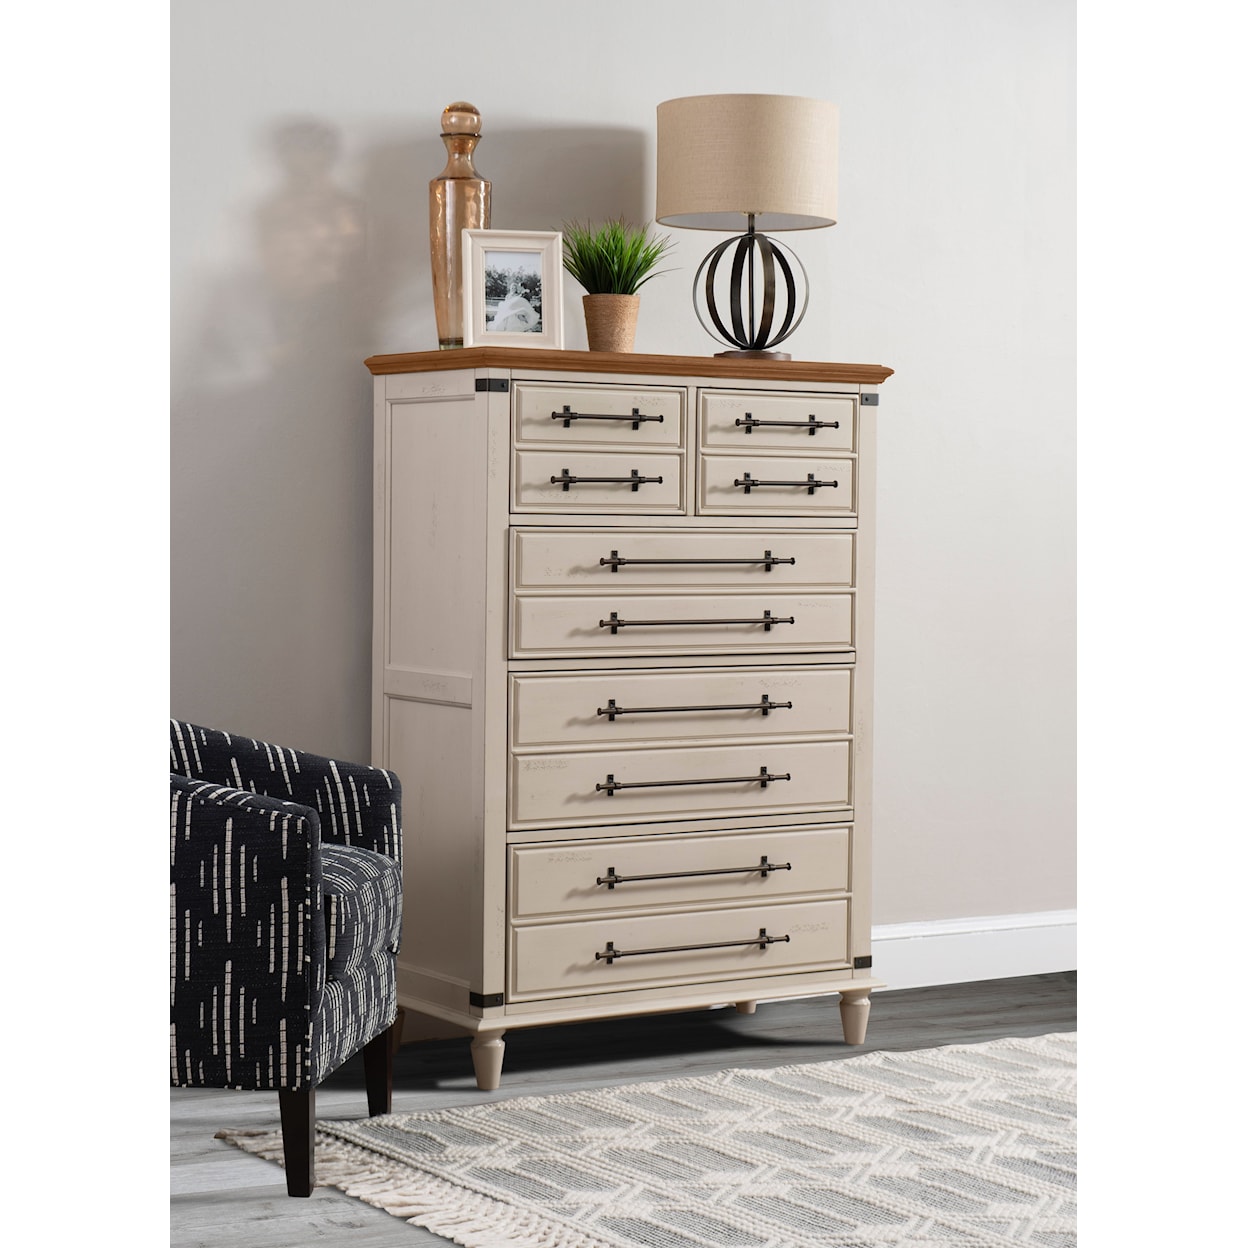 John Thomas Farmhouse Chic 5 Drawer Chest in Bourbon & Biscuit